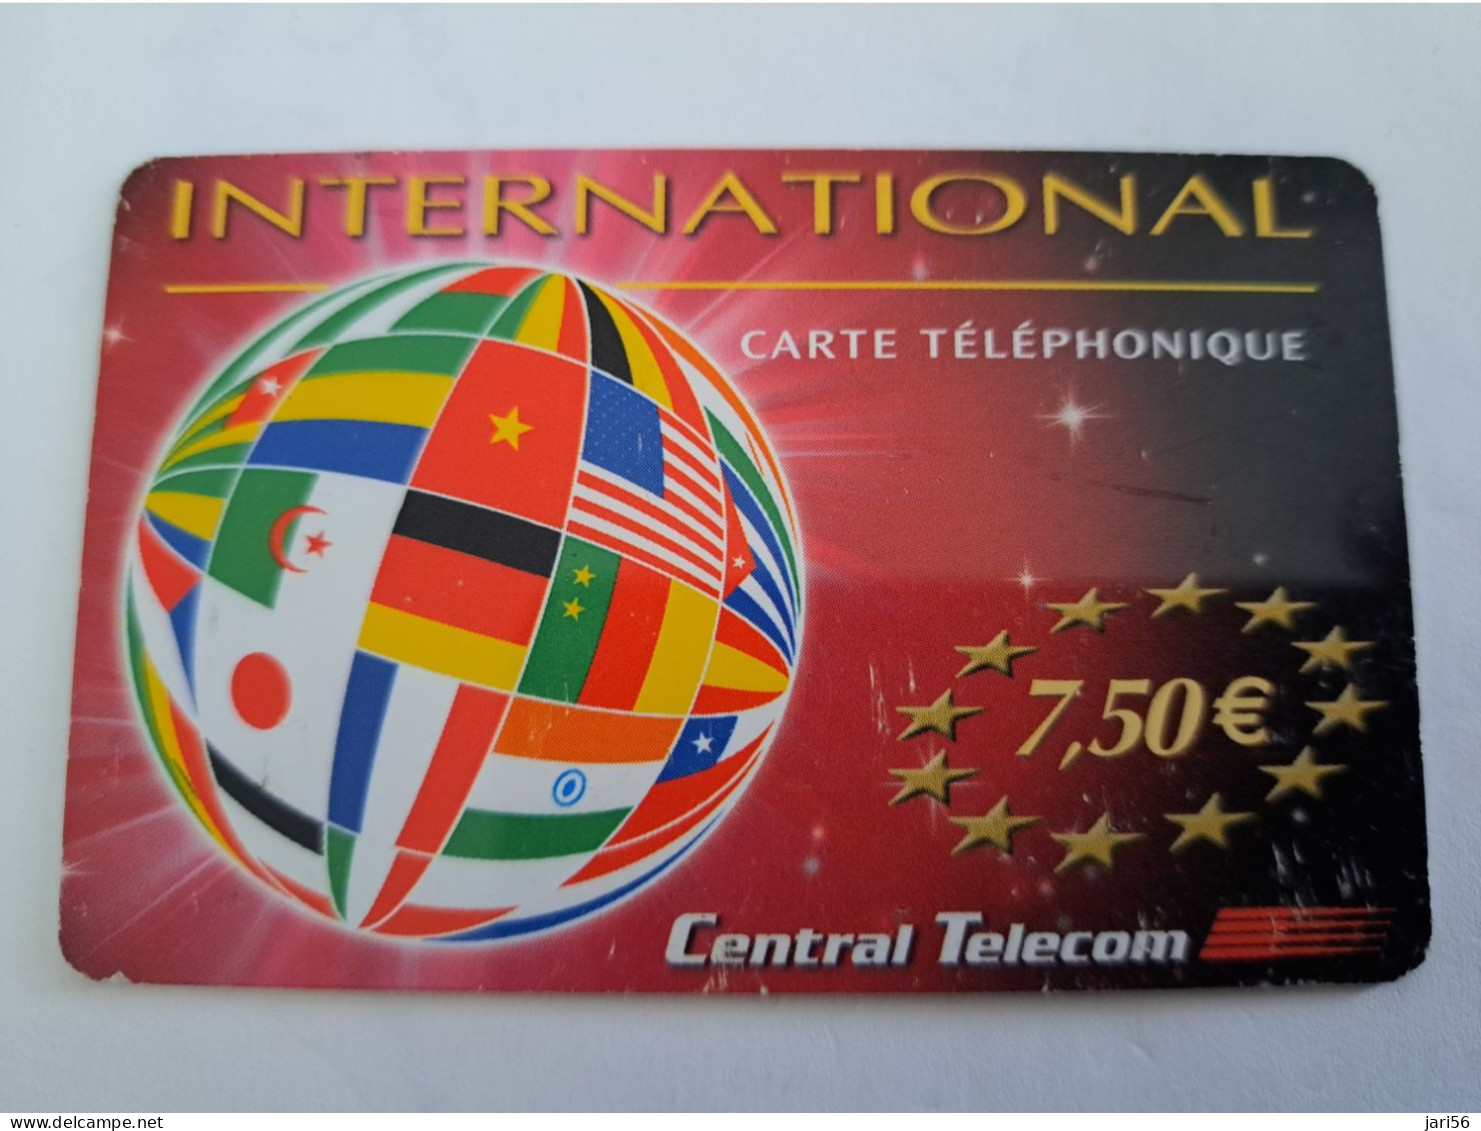 FRANCE/FRANKRIJK  /€ 7,50 /  CENTRAL TELECOM  / COUNTRY FLAGS/ PREPAID  USED    ** 14671** - Prepaid: Mobicartes